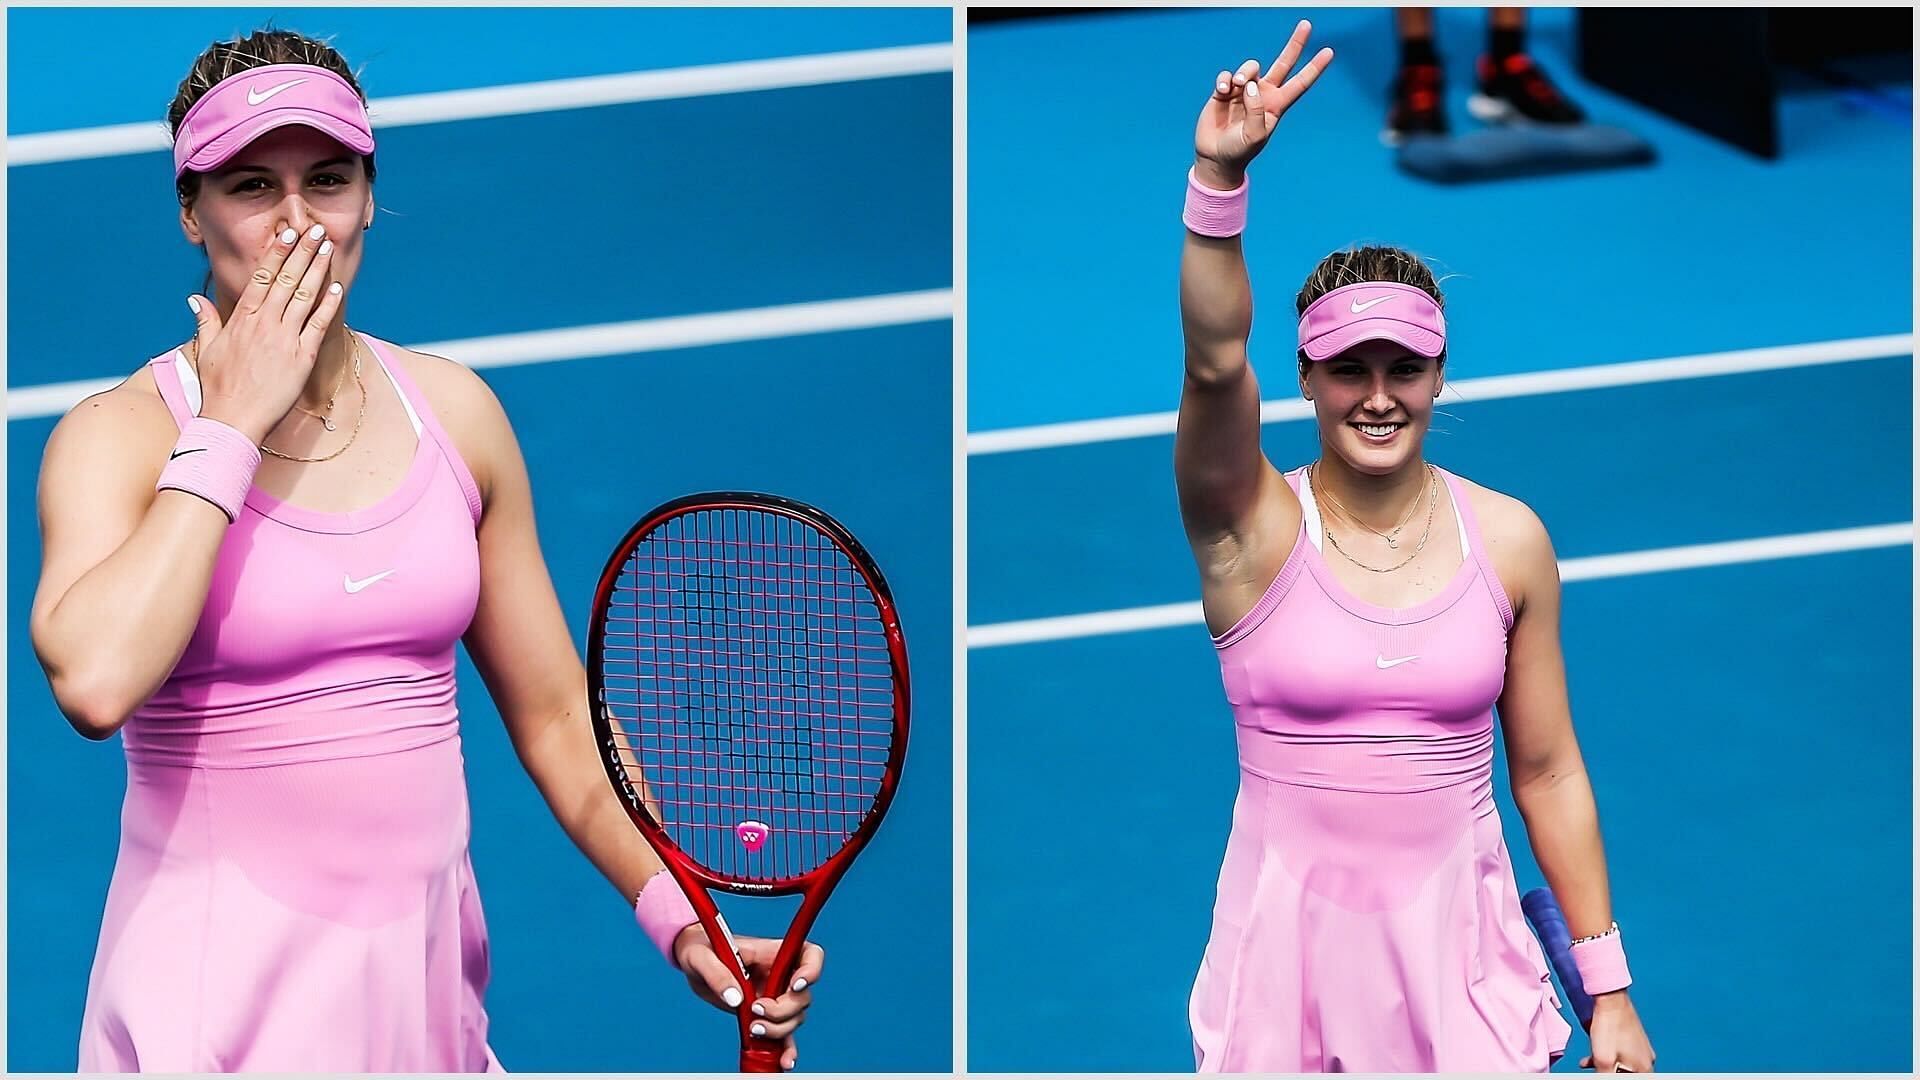 Eugenie Bouchard receives a warm welcome ahead of her Madrid Open campaign.